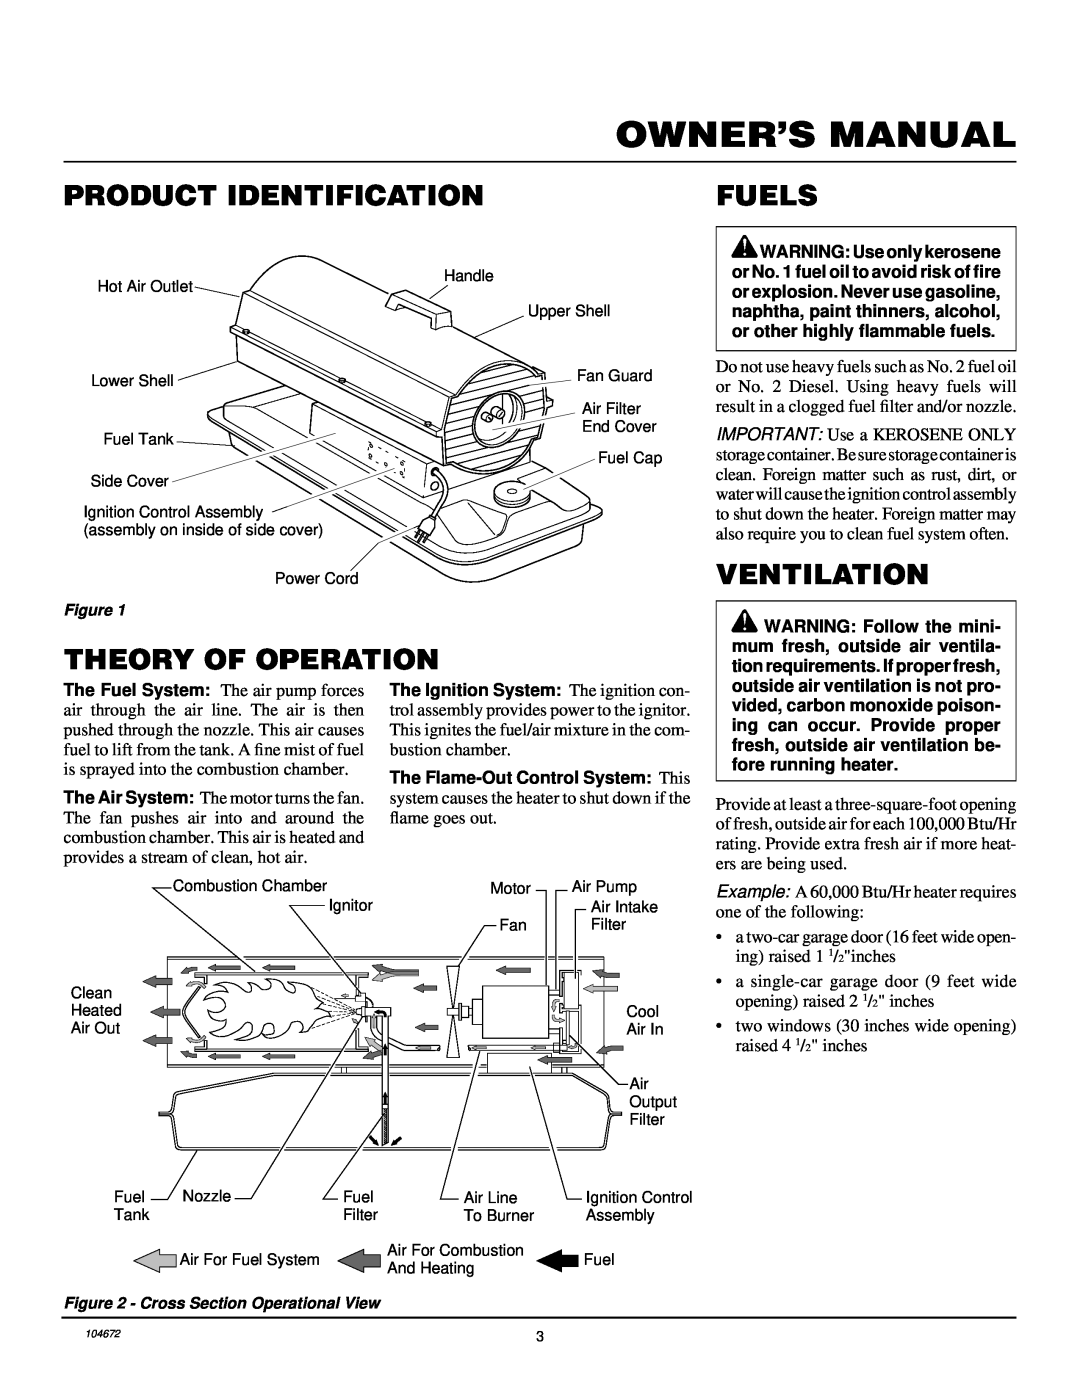 Desa RM60 owner manual Product Identification, Fuels, Theory Of Operation, Ventilation 